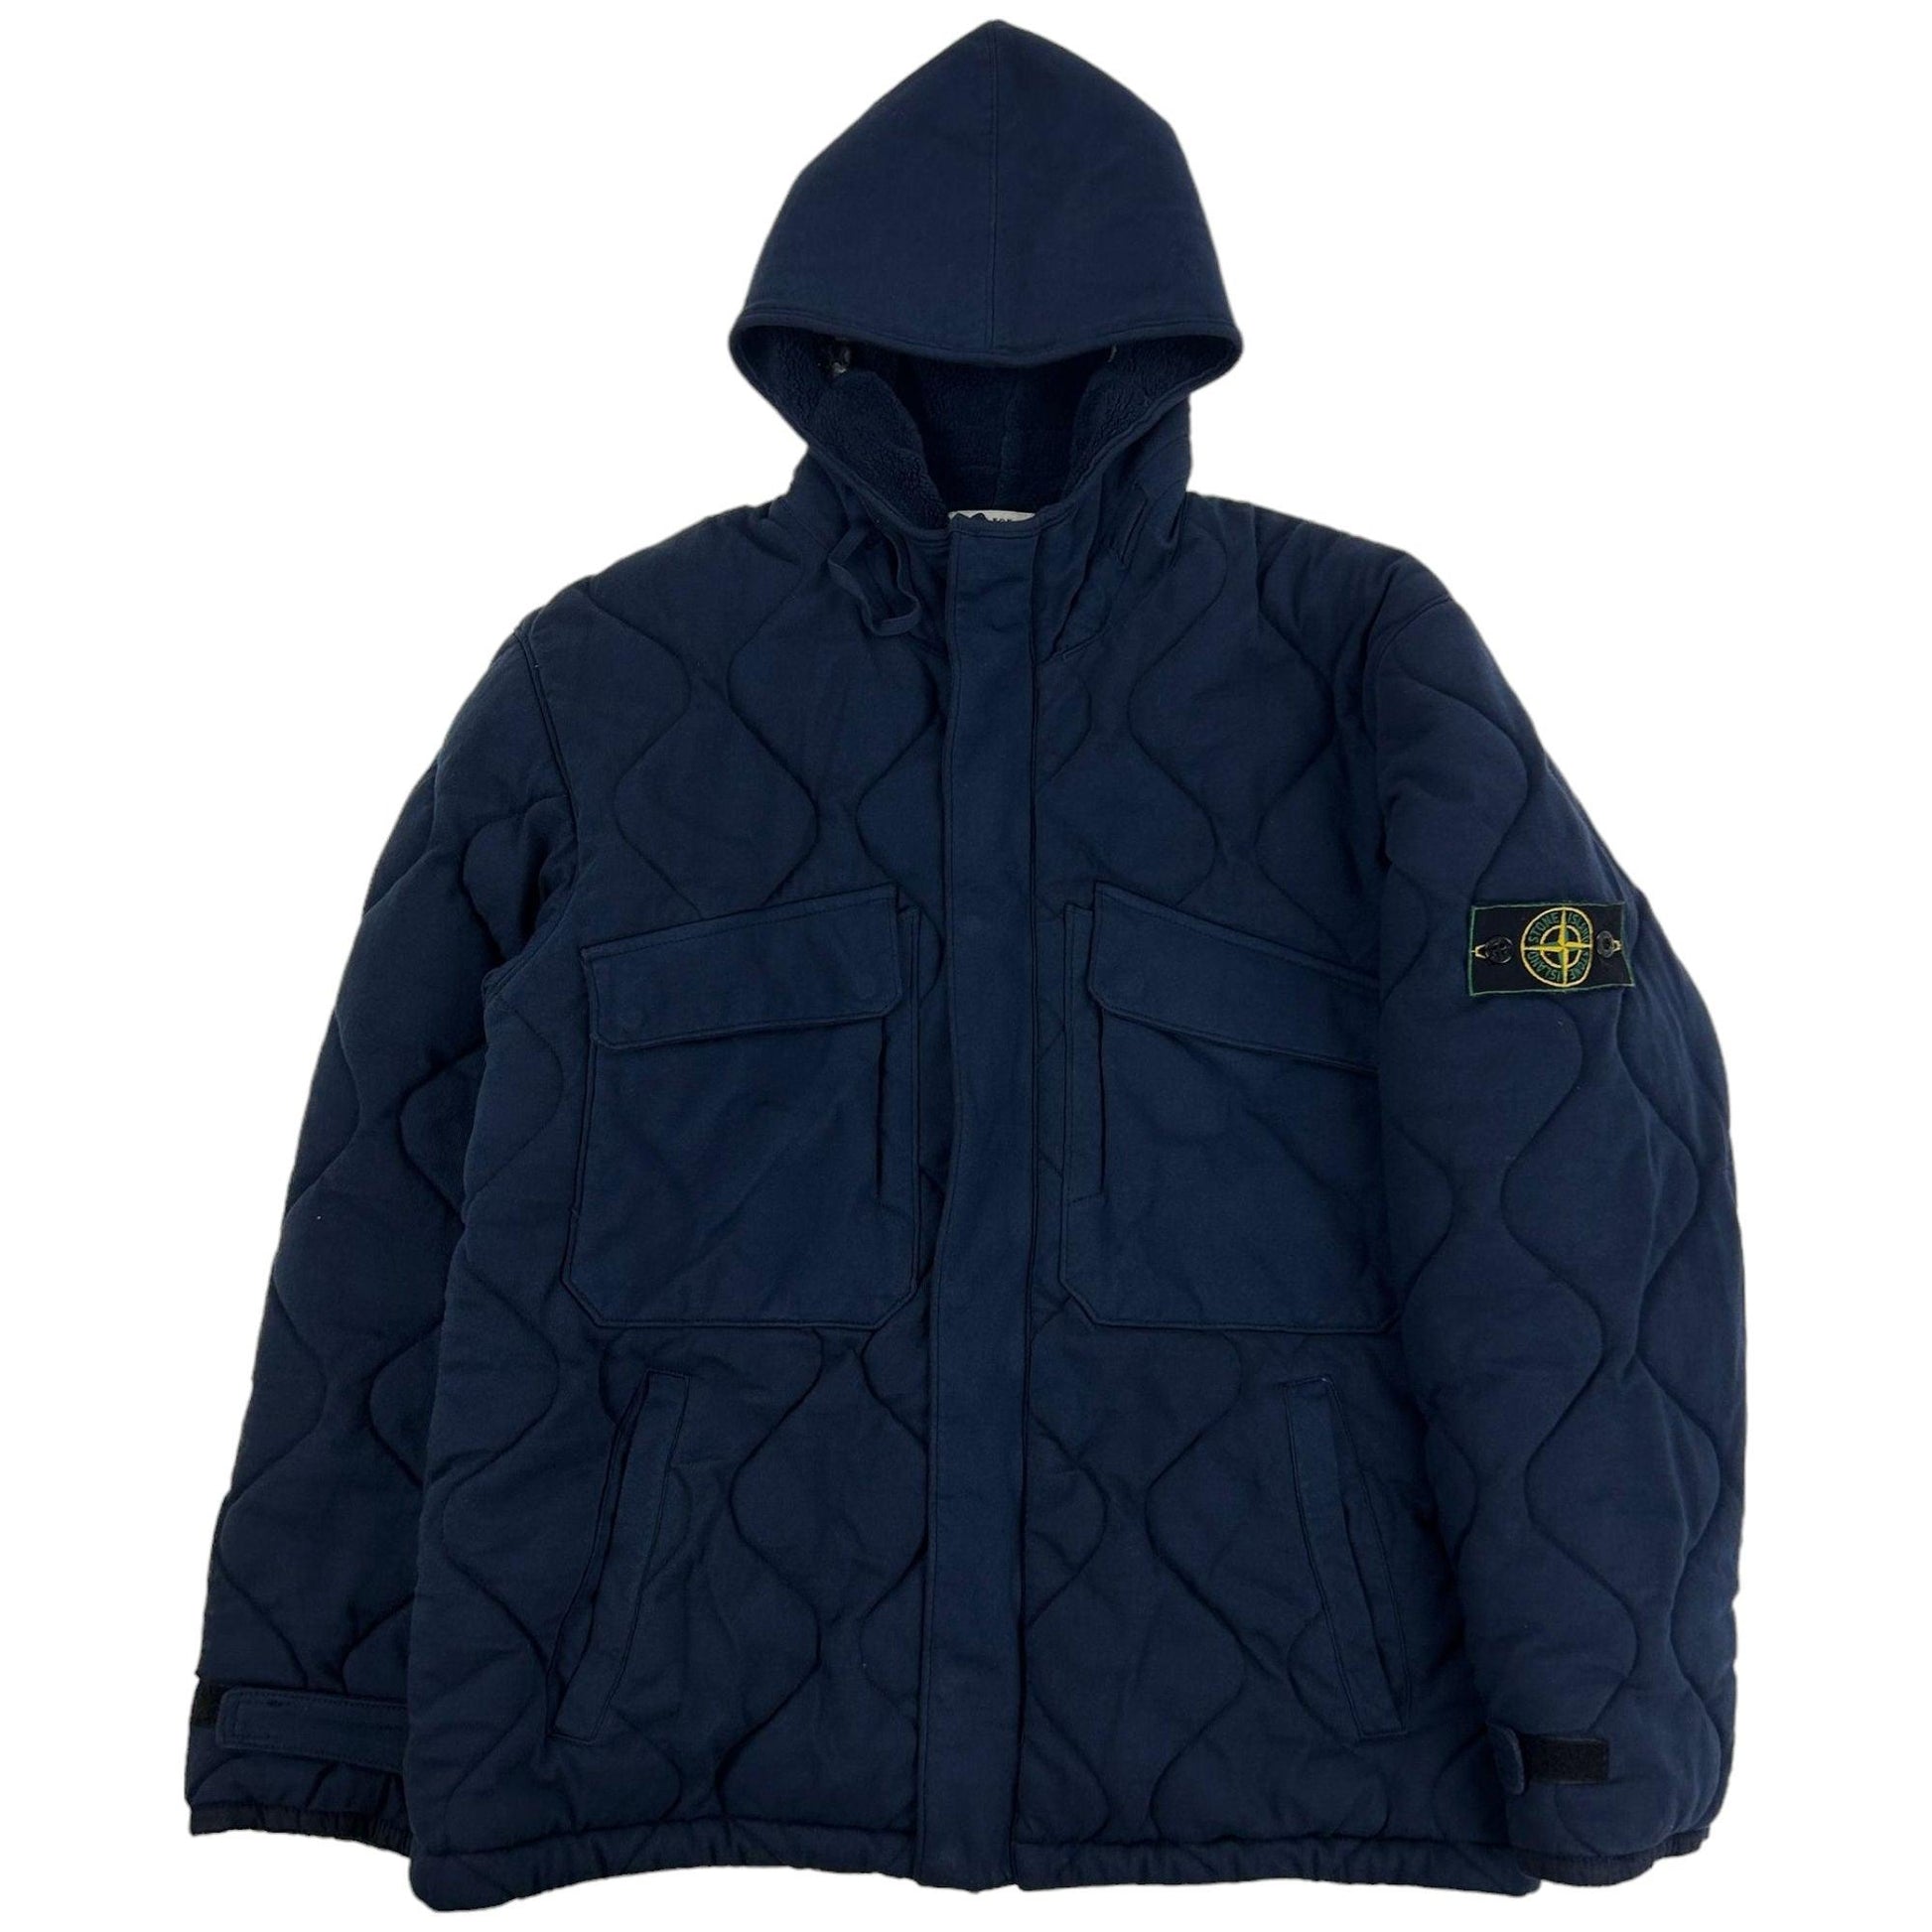 Vintage 1999 Stone Island Quilted Jacket Size L - Known Source